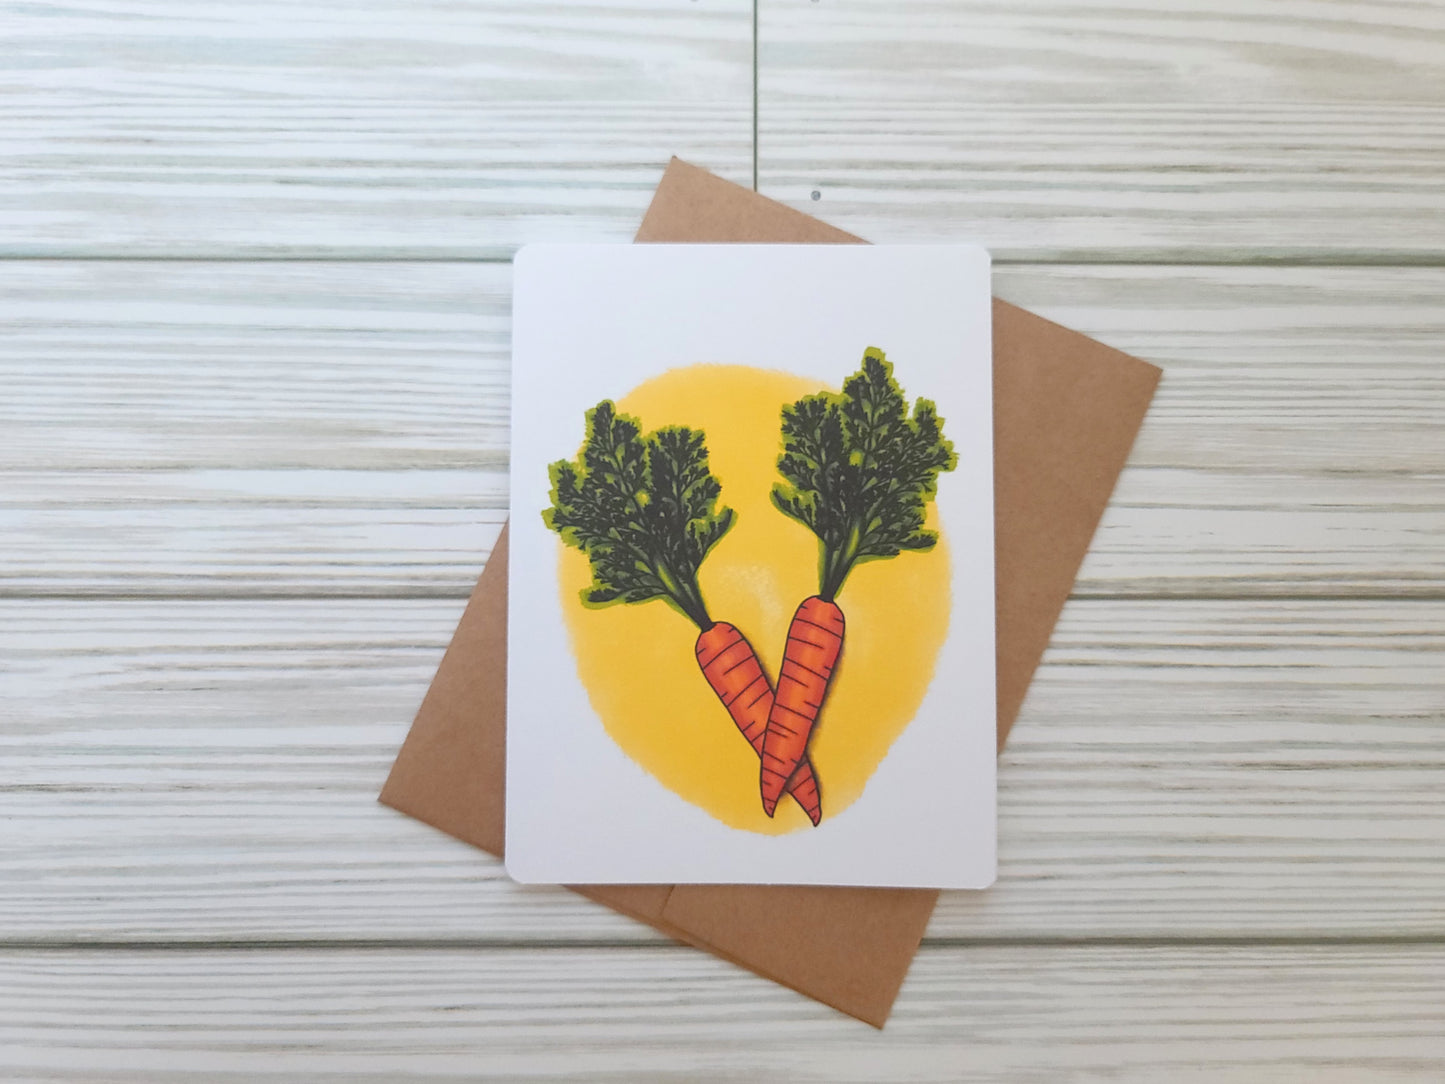 Carrot Handmade Greeting Card - Recycled Paper and Kraft Envelope - Overhead Shot